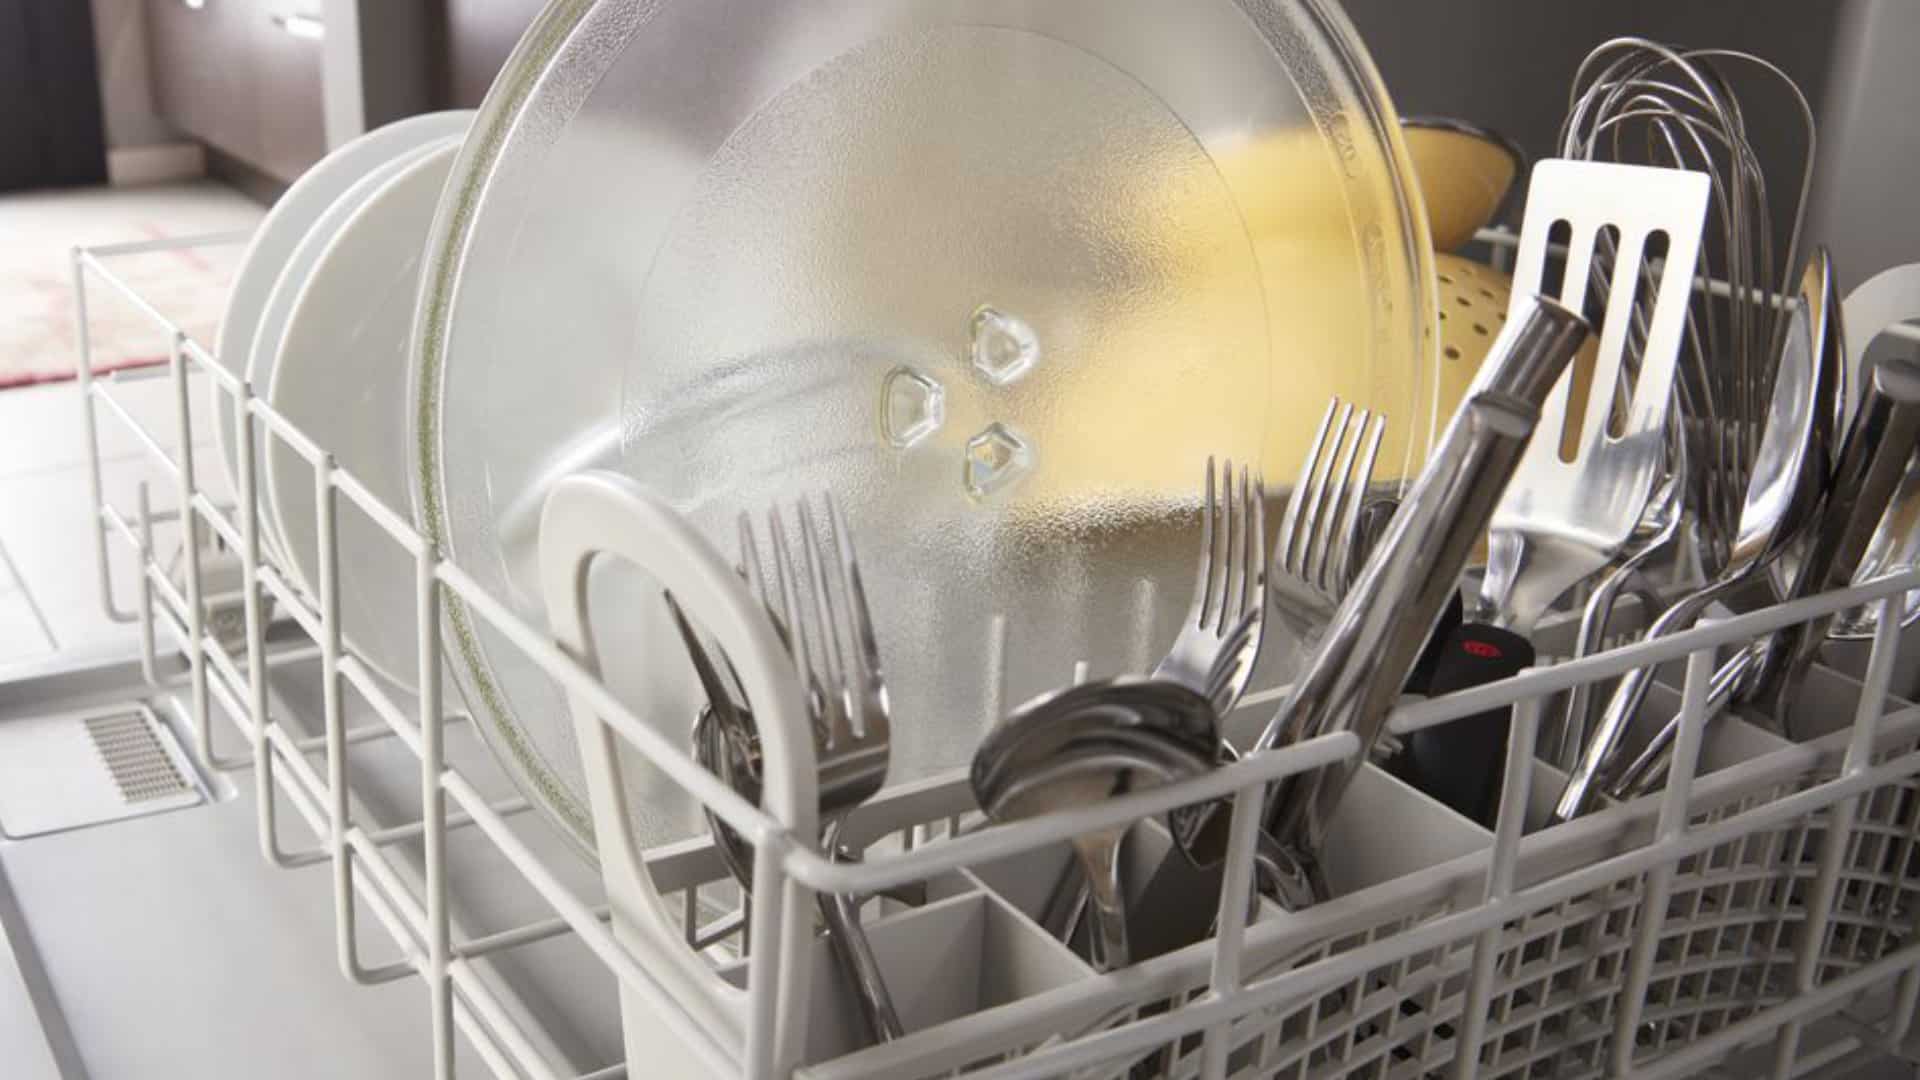 Featured image for “How to Remove a Dishwasher Properly”